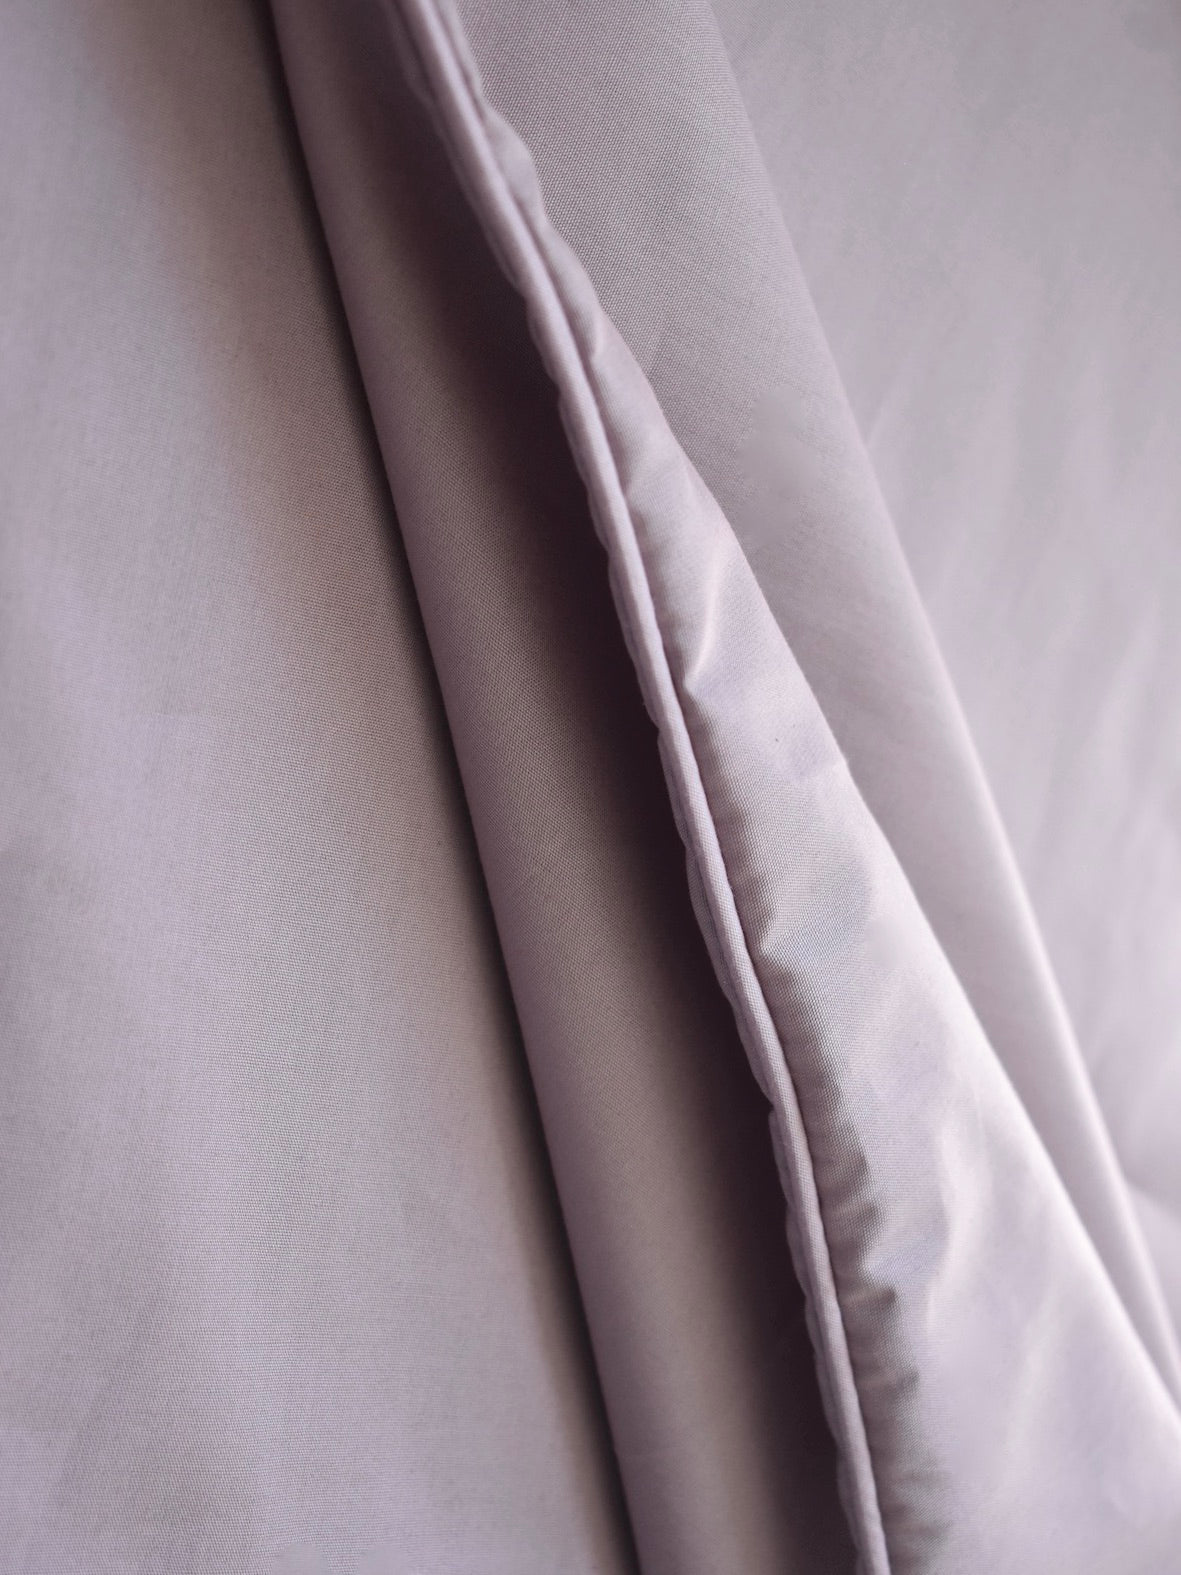 Percale Duvet Cover / Muted Mauve